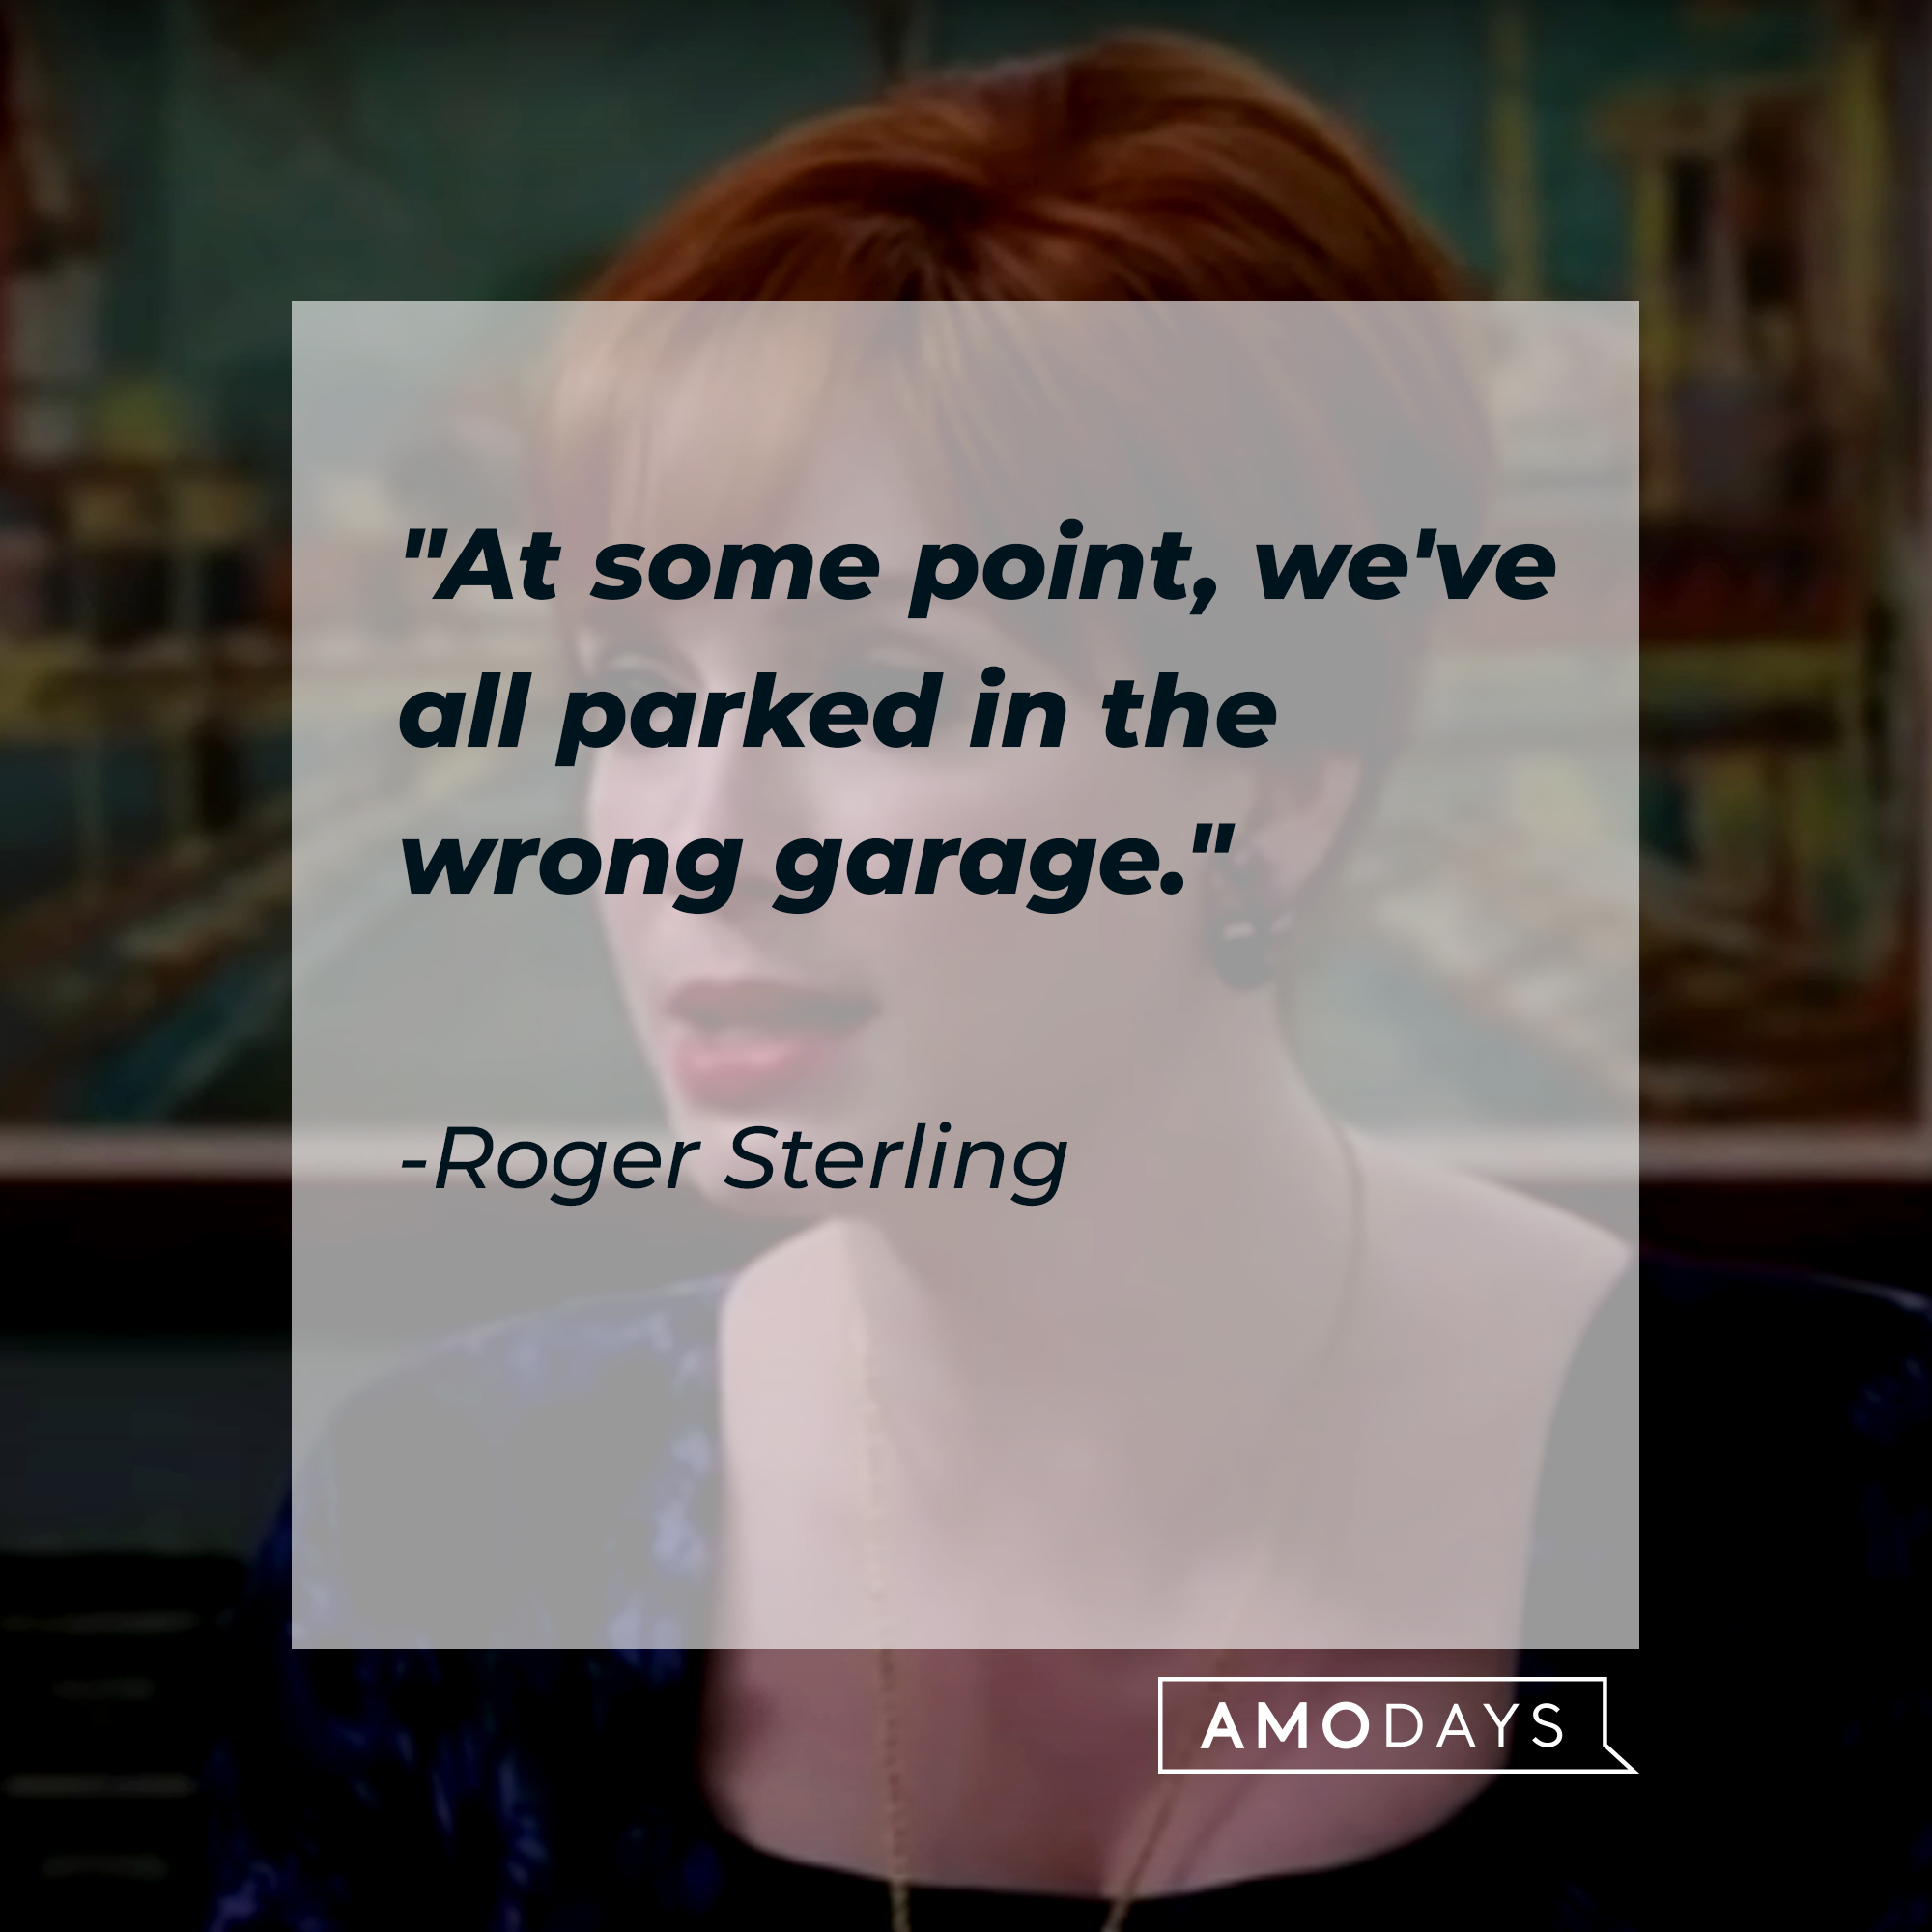 Roger Sterling's quote: "At some point, we've all parked in the wrong garage." | Source: Facebook.com/MadMen